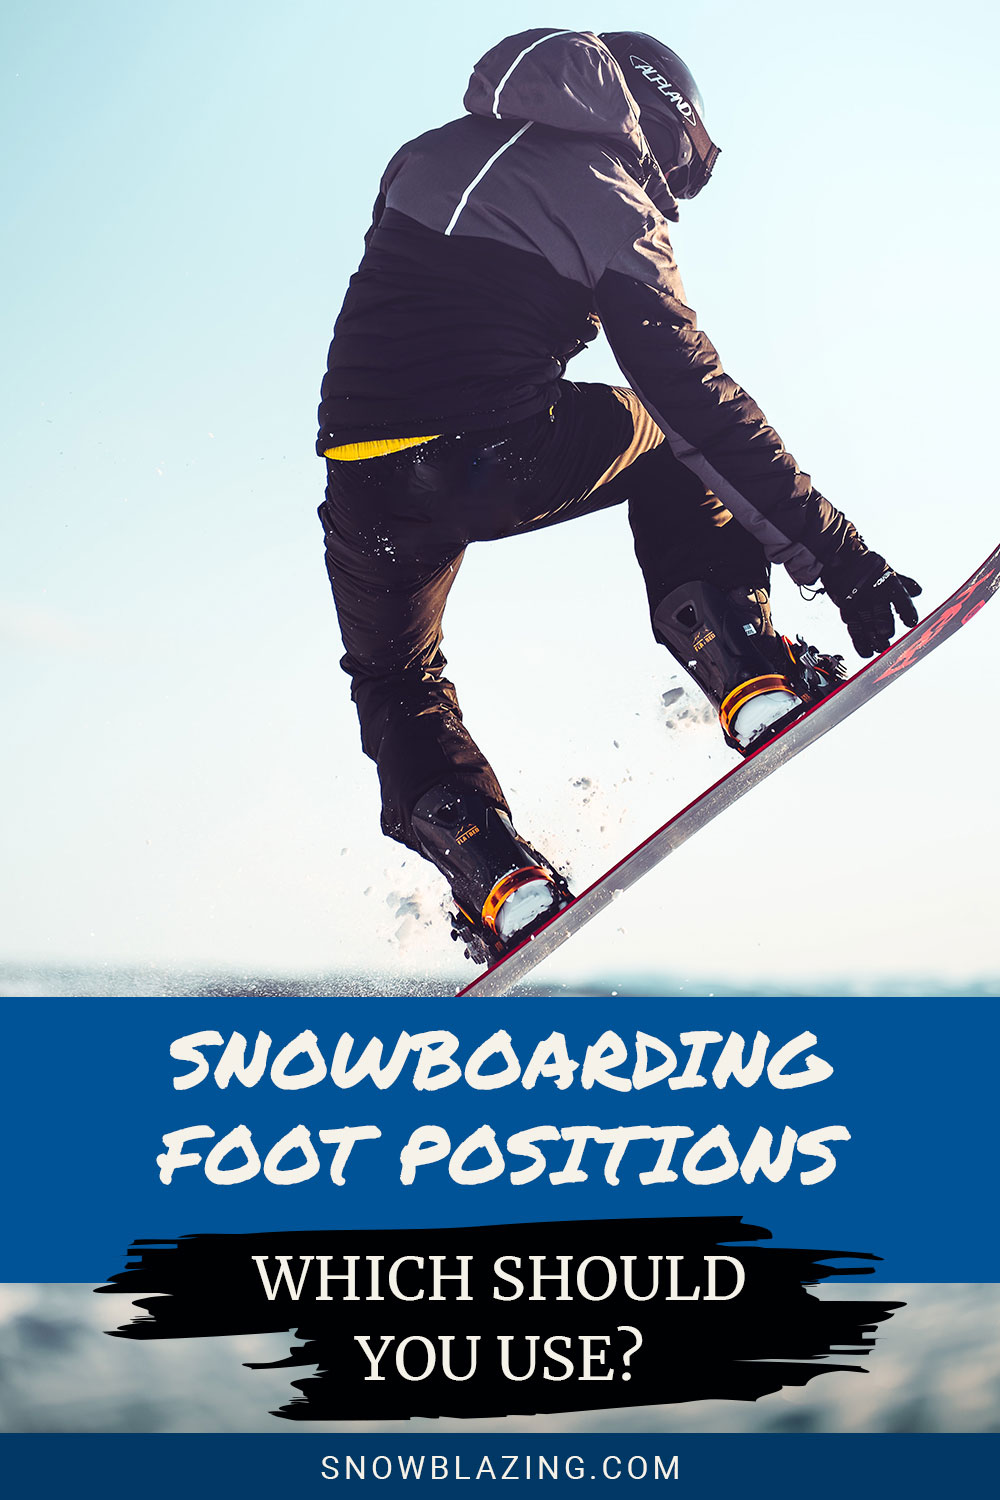 Man snowboarding up in the air - Snowboarding Foot Positions - Which Should You Use?